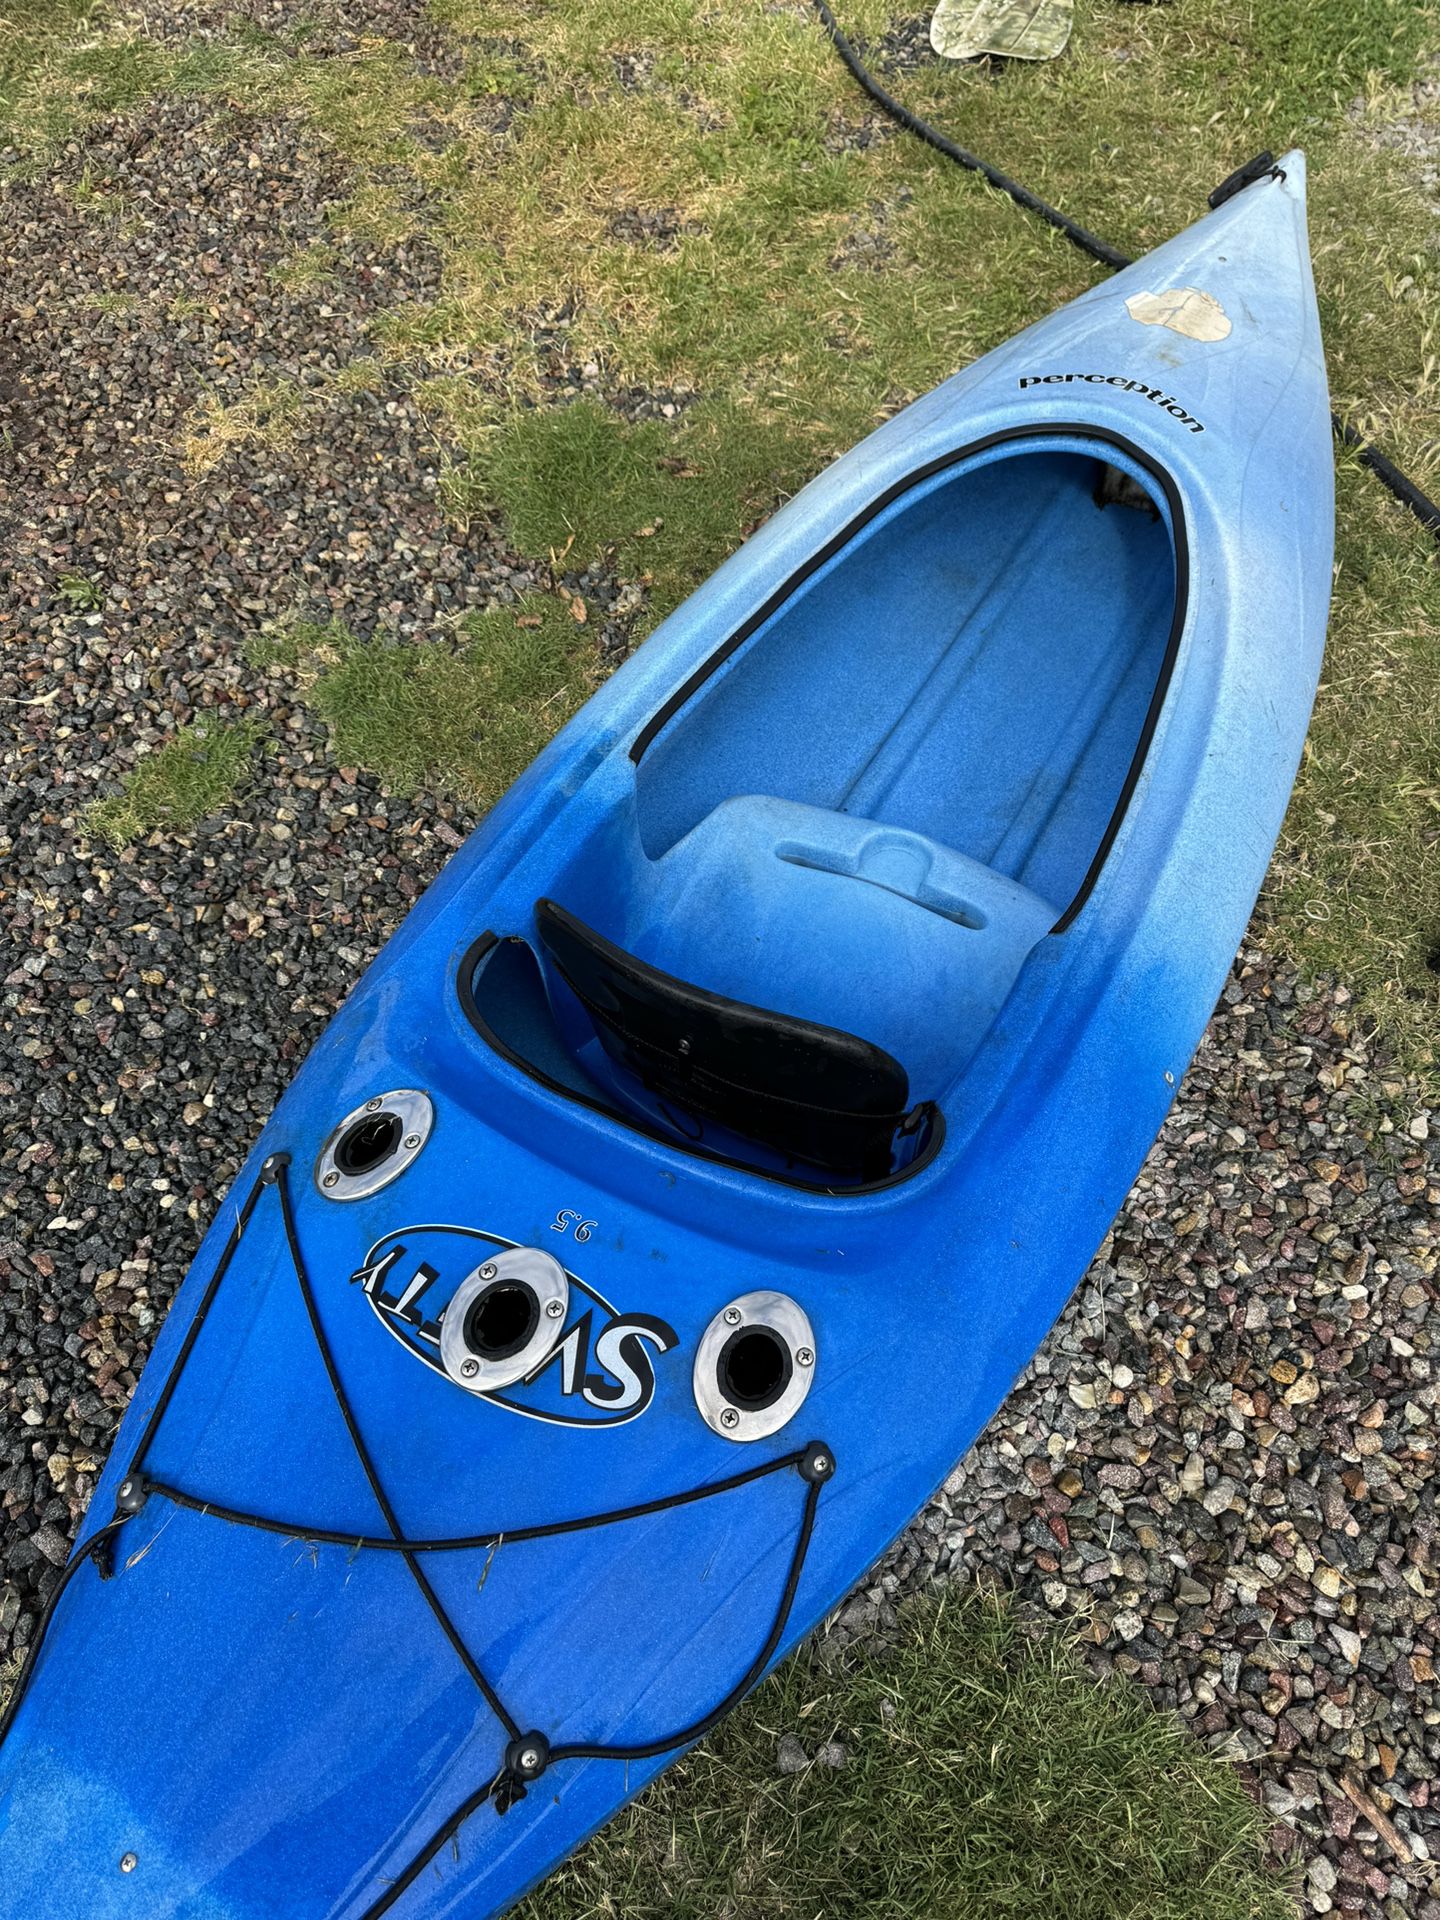 Single Person Kayak With Fishing Rod Holders